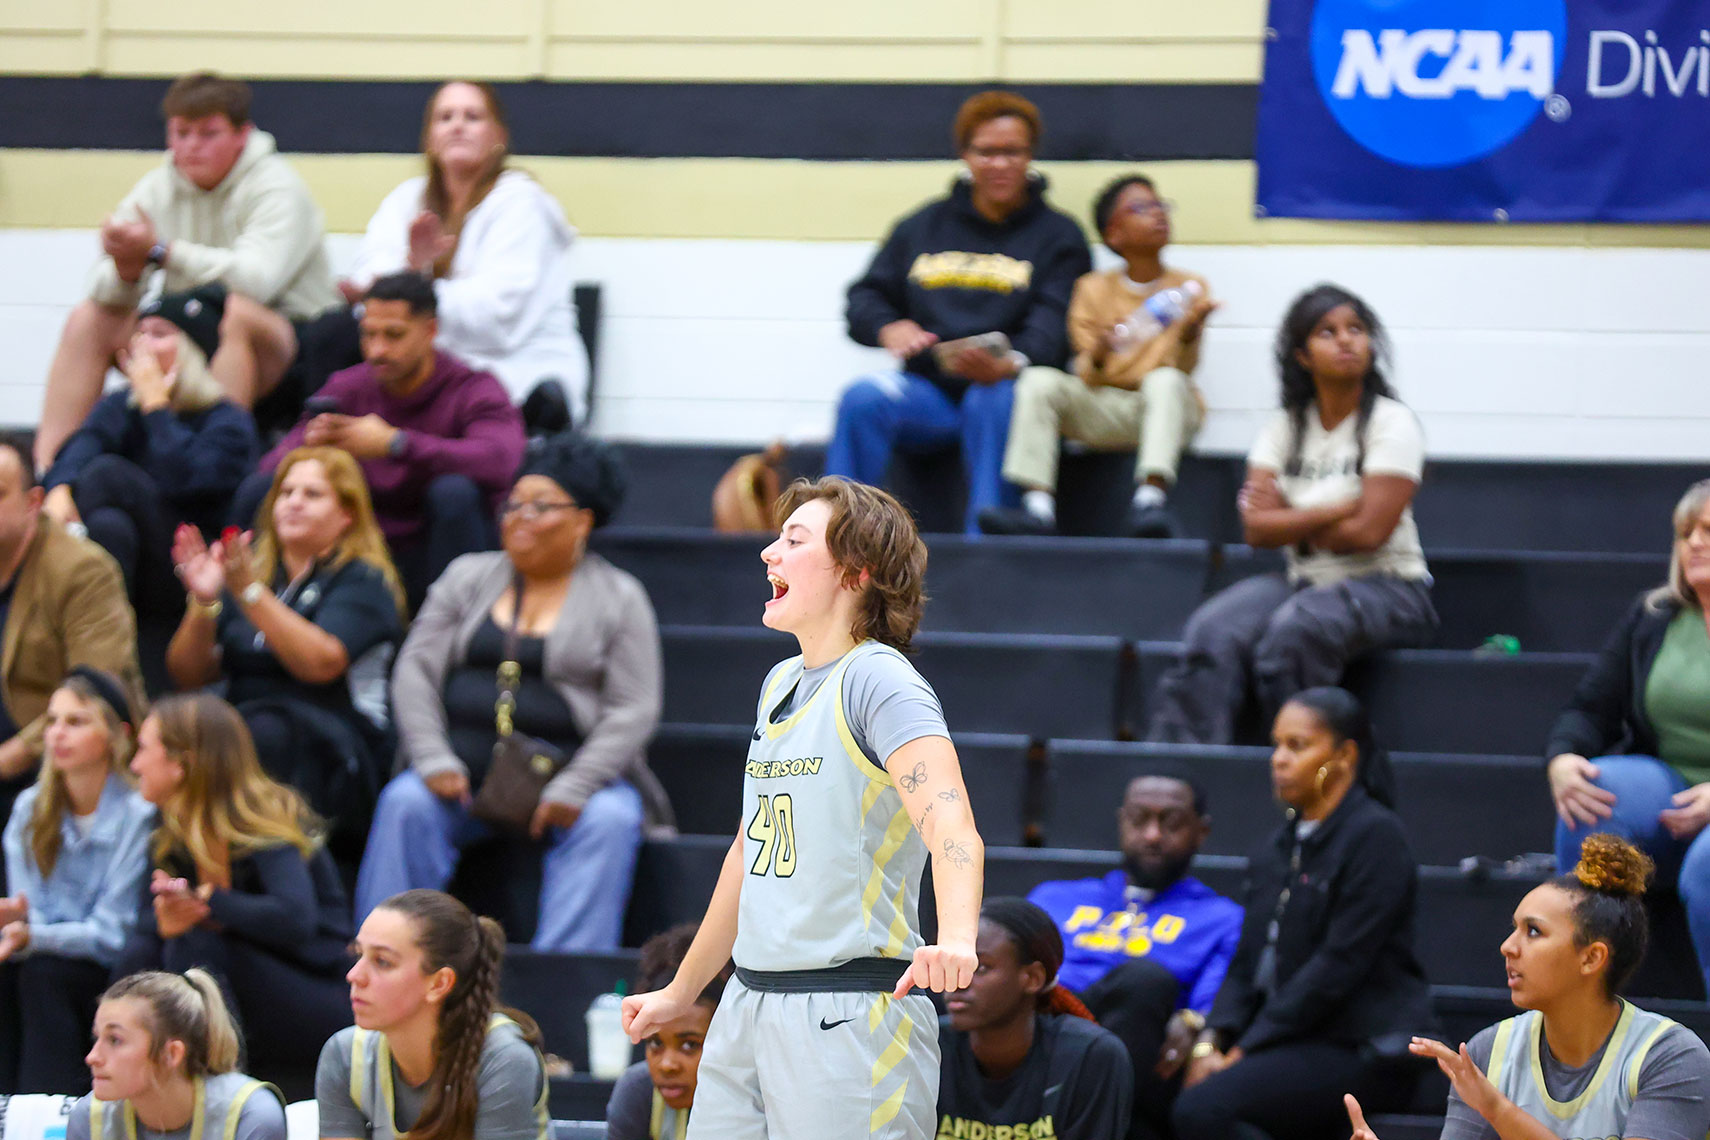 Trojans Remain No. 2 In D2CSC Women’s Basketball Regional Poll; Move Up To No. 14 In The D2CSC National Poll